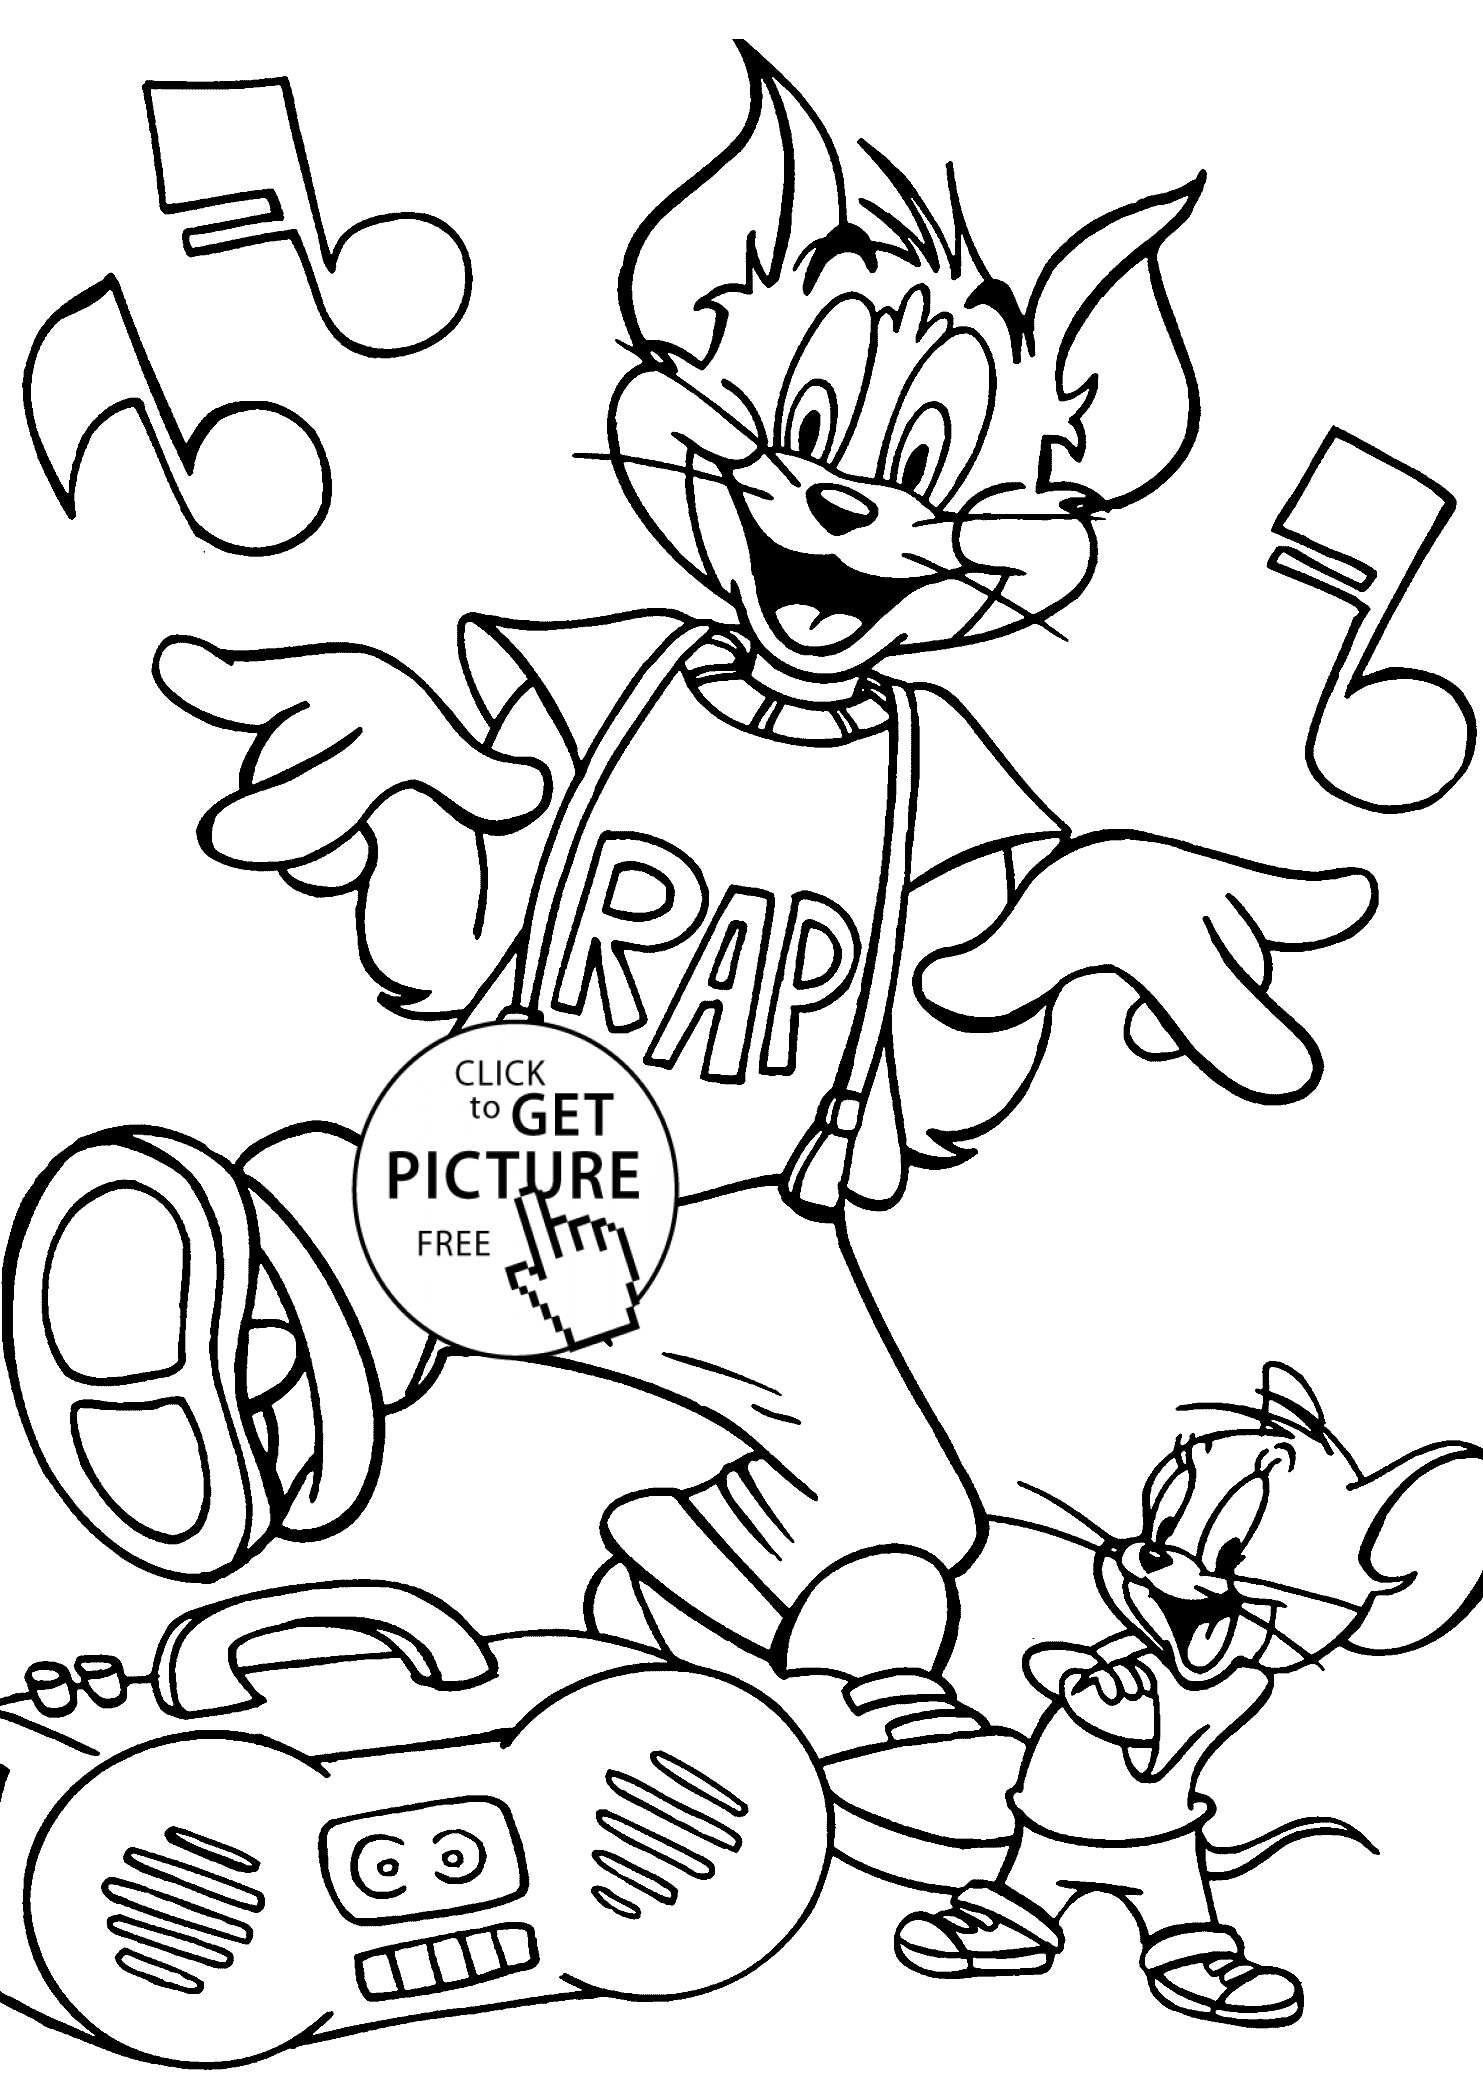 Dance Coloring Pages For Kids
 Tom and Jerry dance coloring pages for kids printable